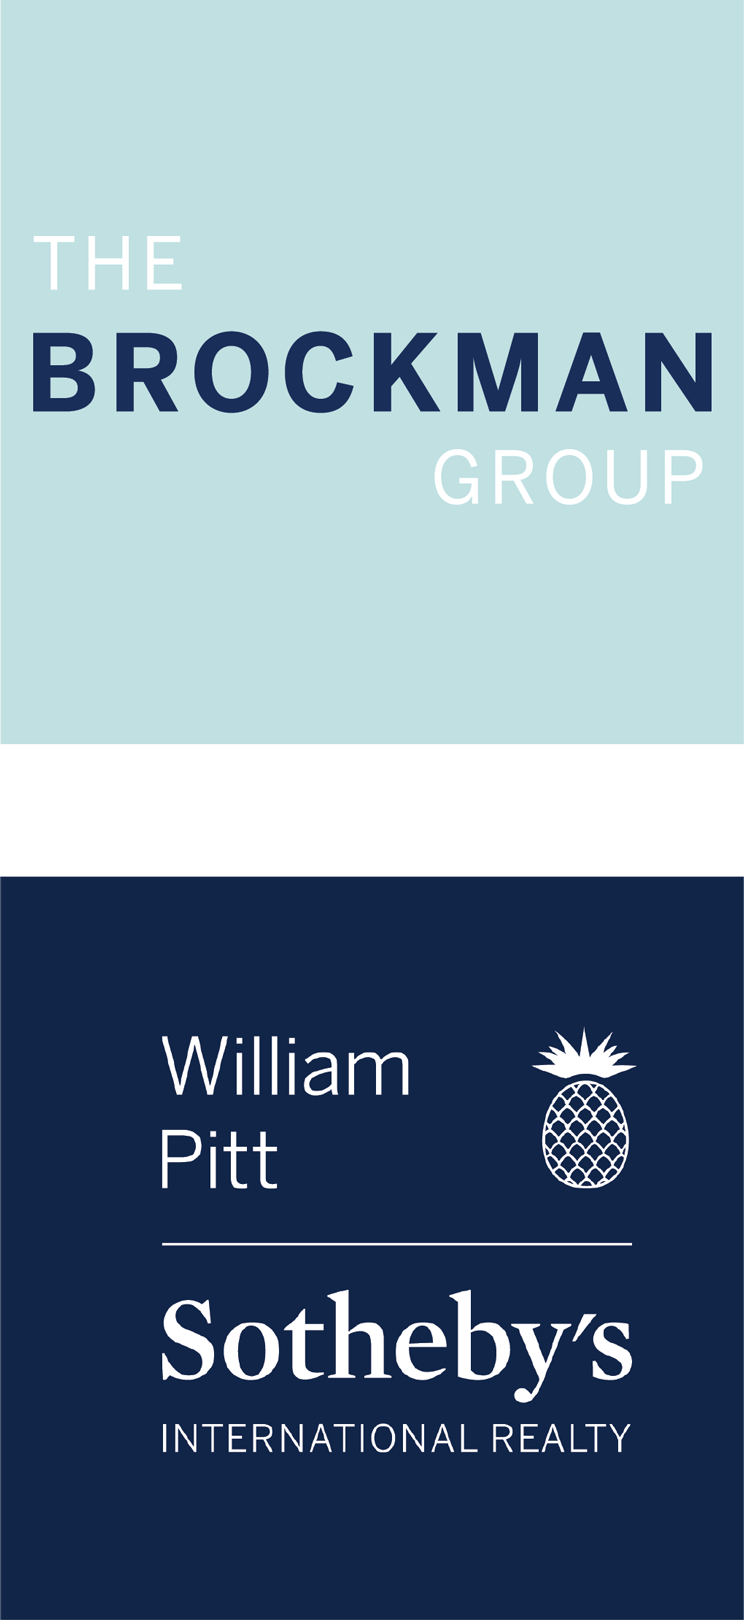 The Brockman Group of William Pitt Sotheby's International Realty